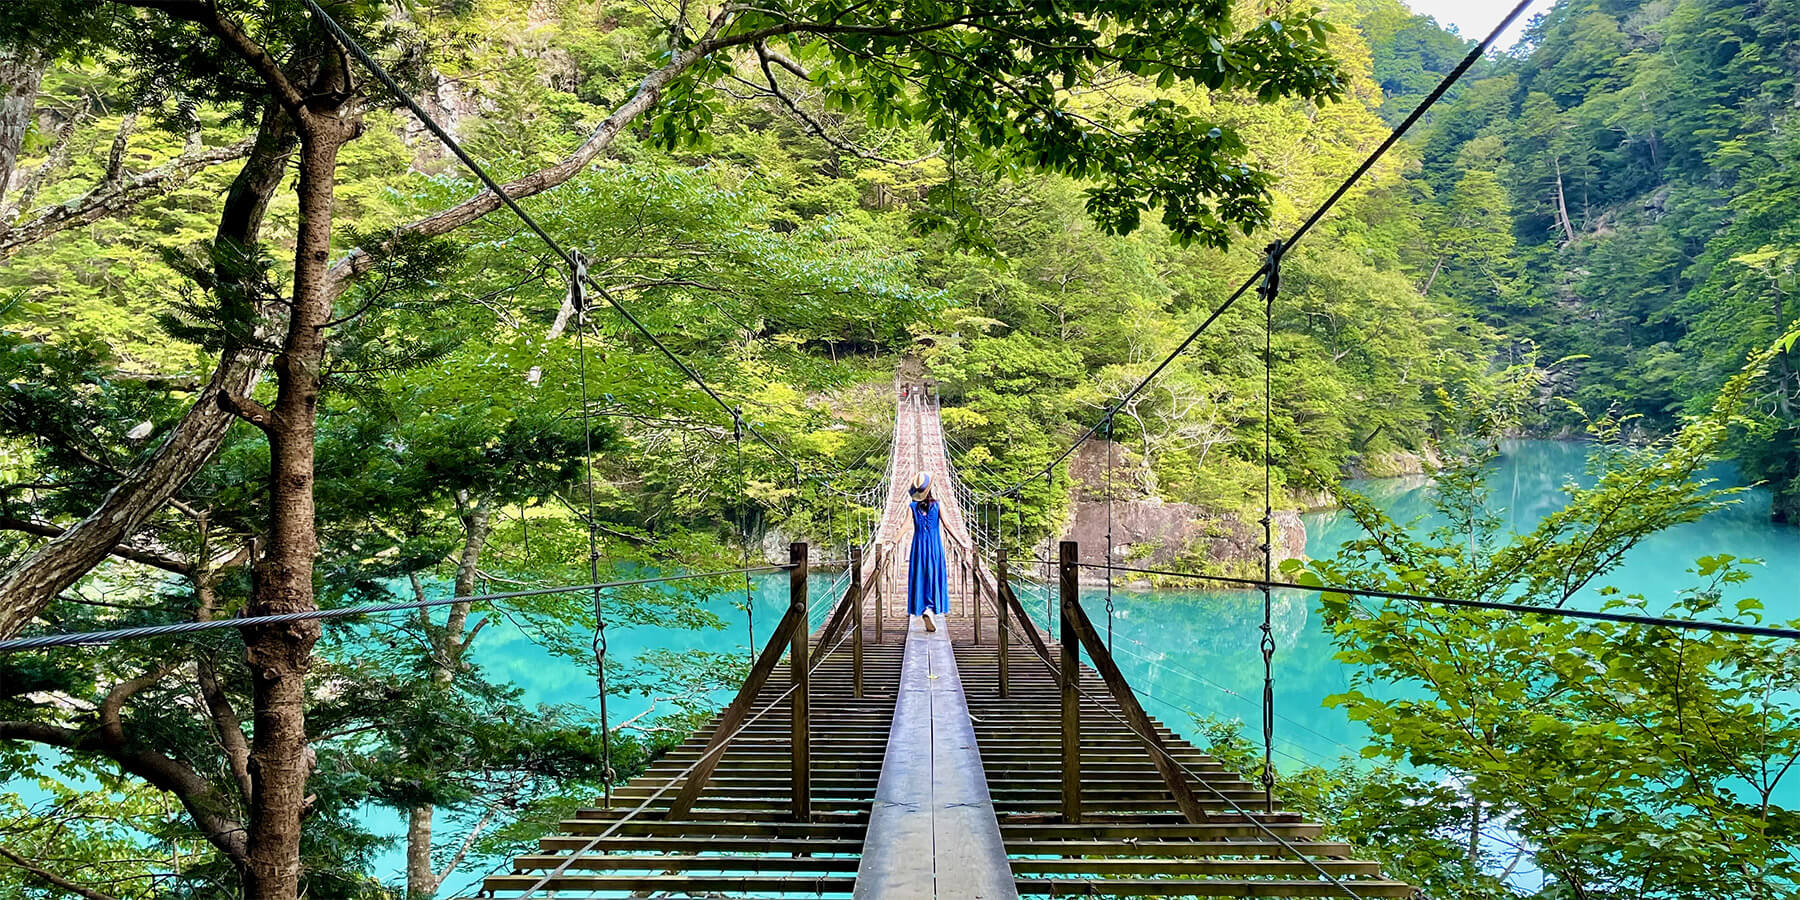 Explore Japan's remote Southern Alps on foot and by helicopter with this exciting new Shizuoka itinerary.